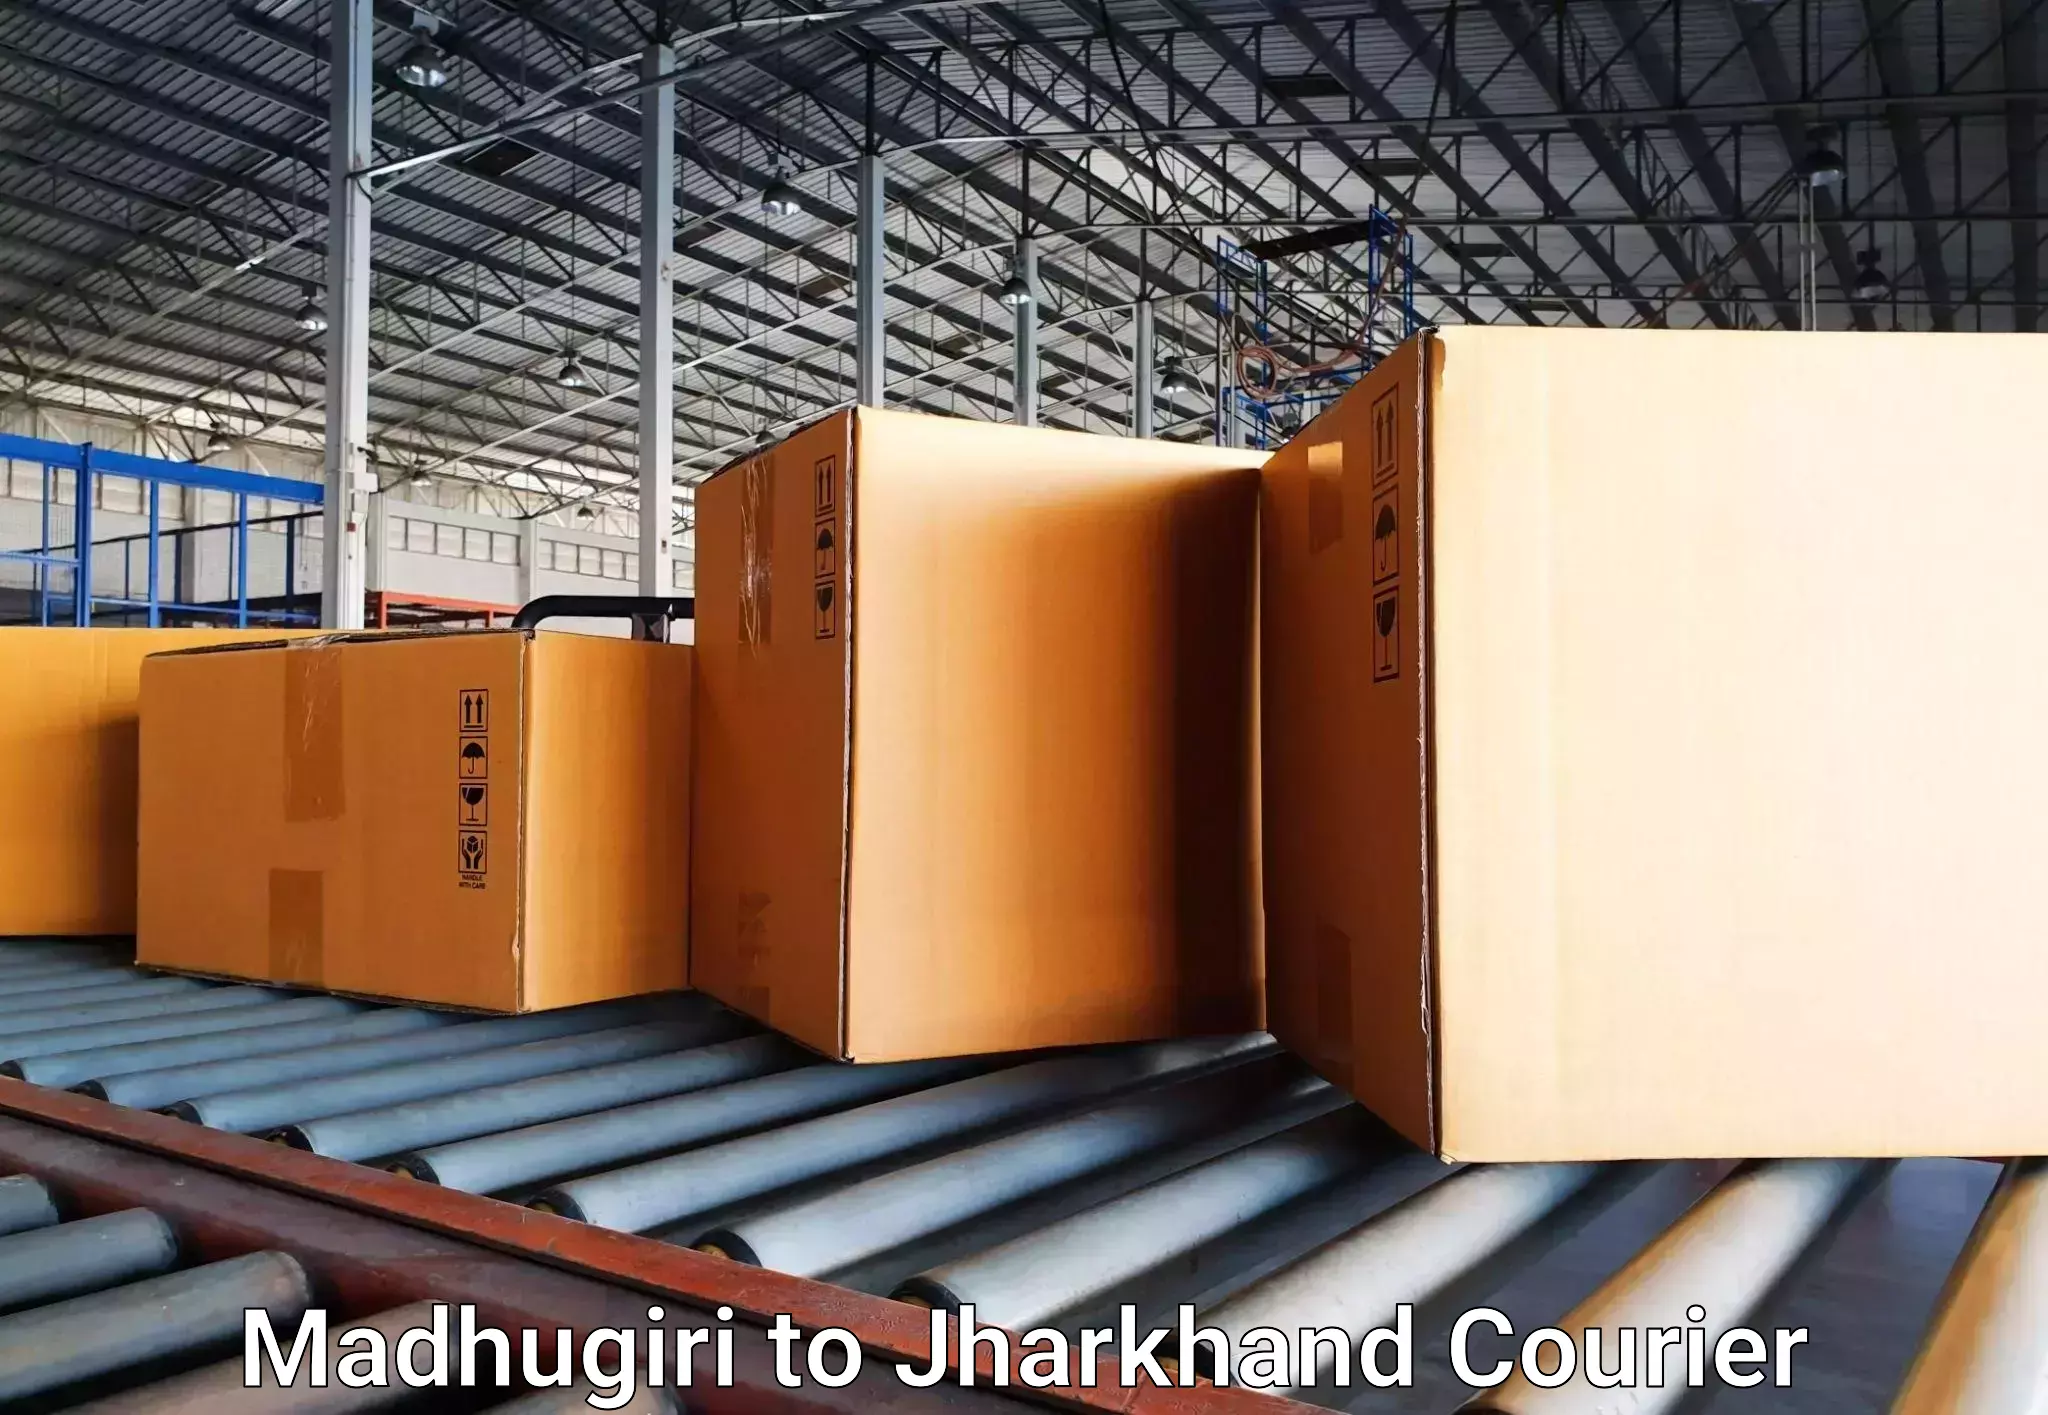 Professional baggage transport in Madhugiri to Jharkhand